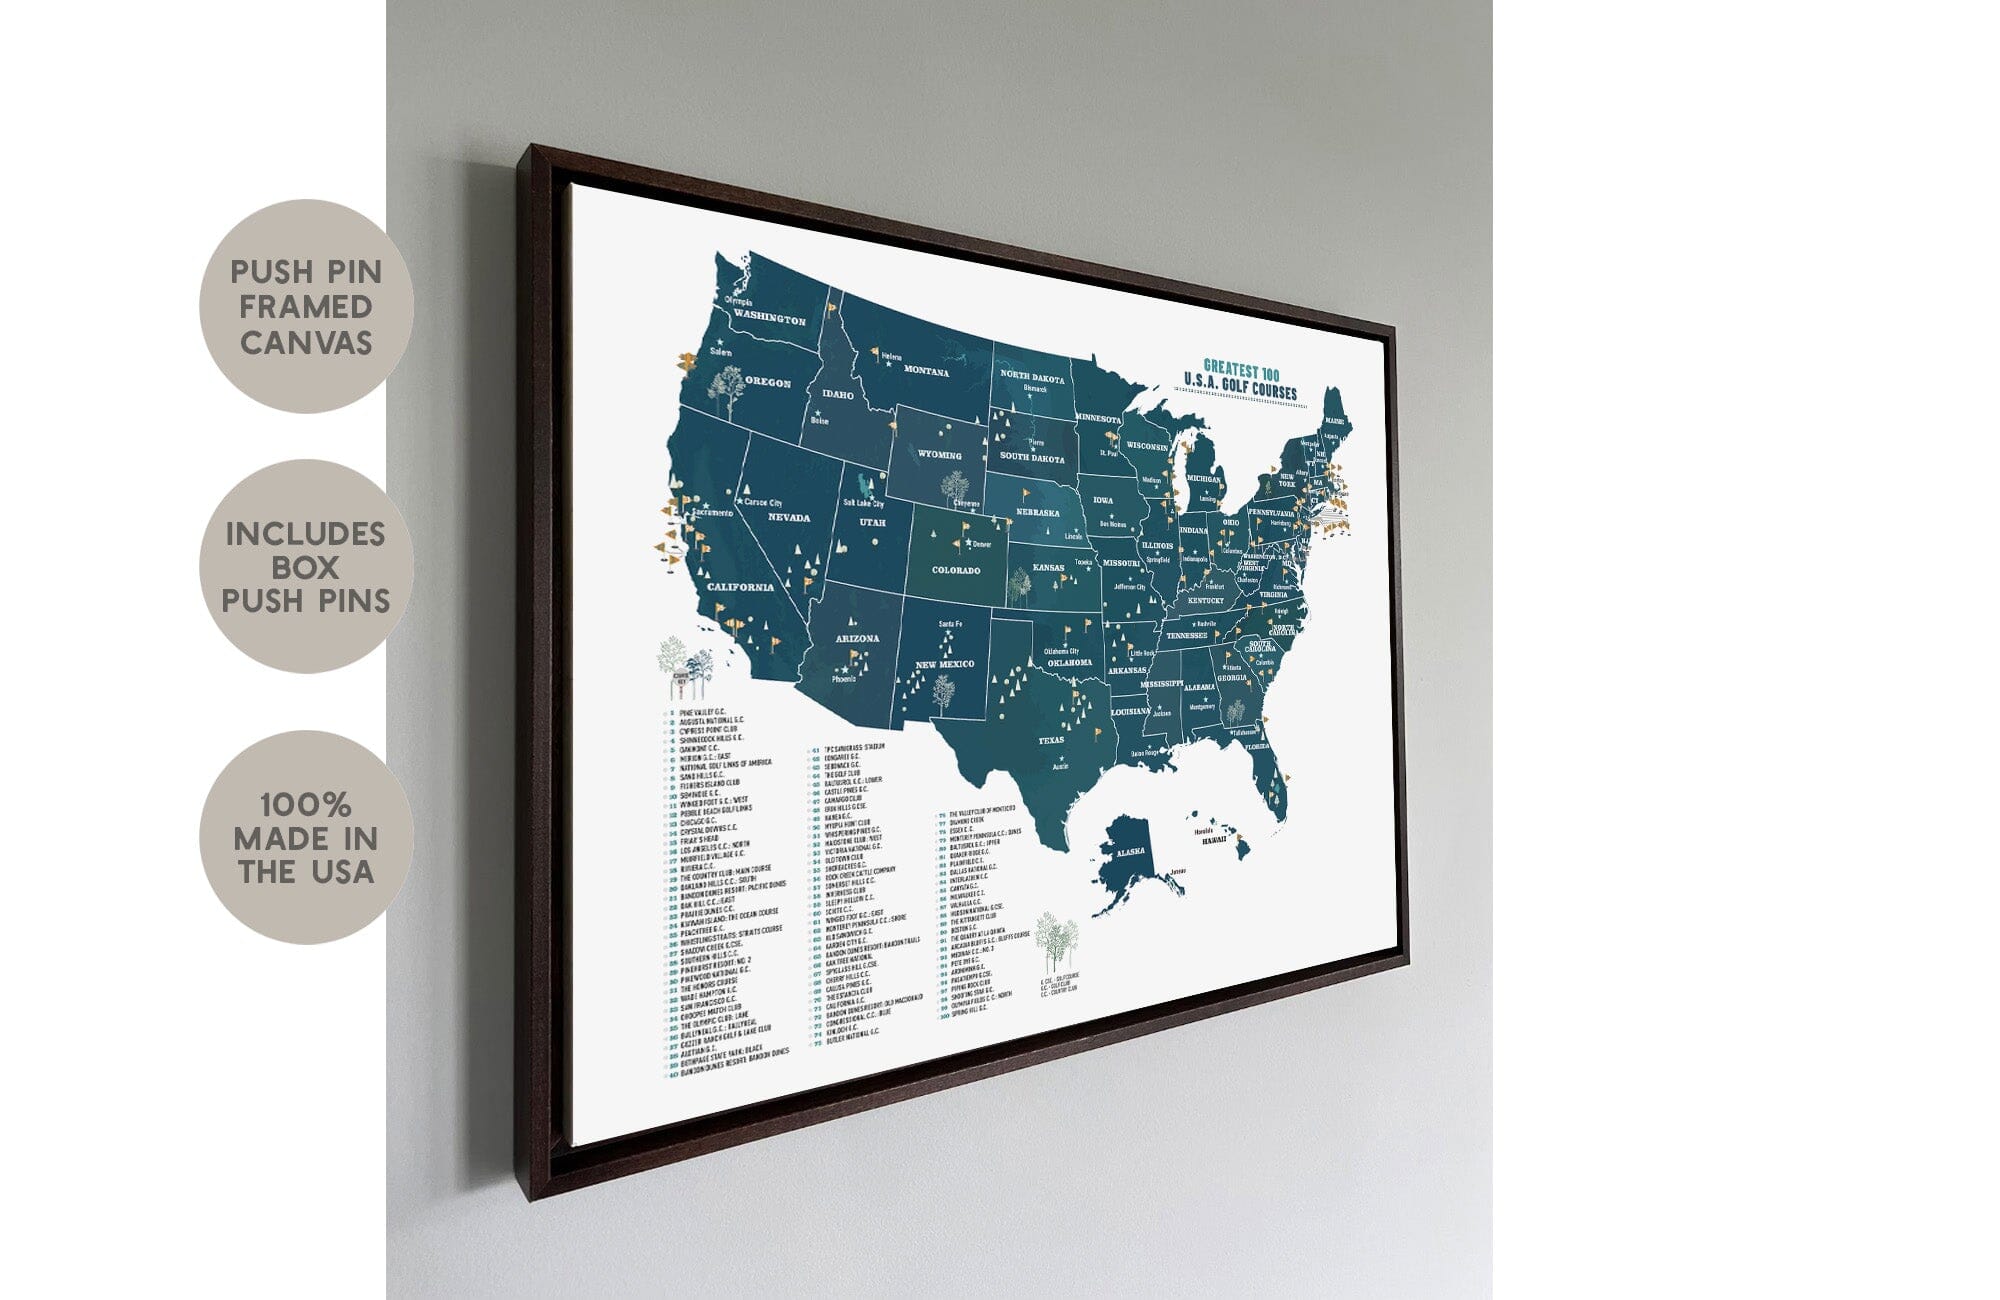 Greatest 100 Golf Courses in the USA, BLACK FRAMED CANVAS, Push Pin Board Map World Vibe Studio 18X24 Navy 